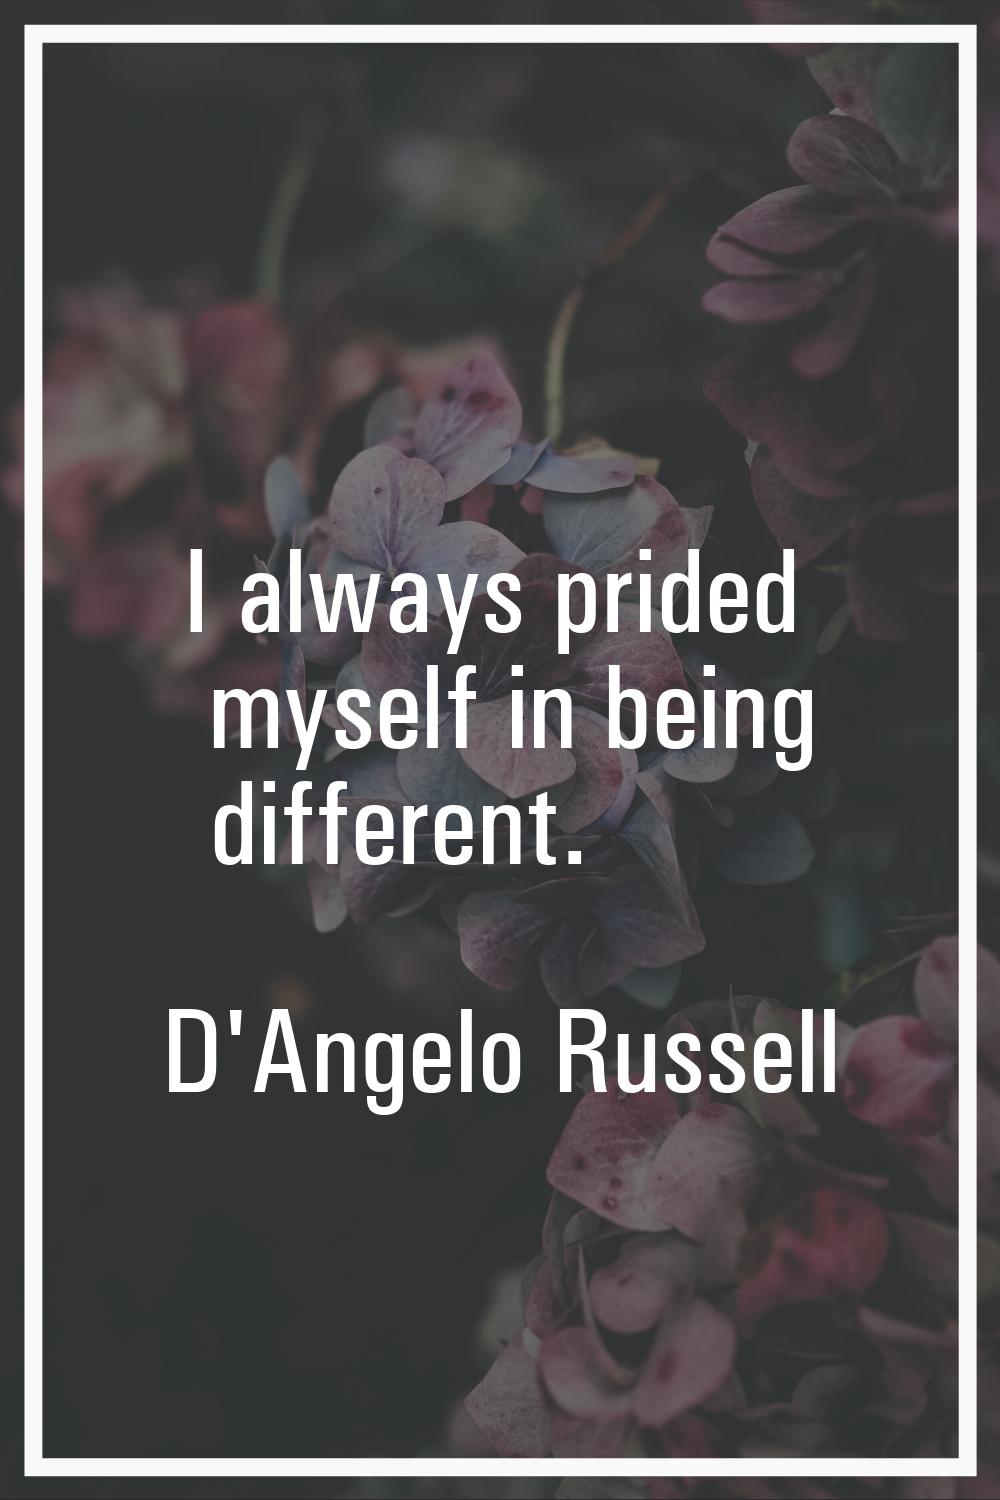 I always prided myself in being different.